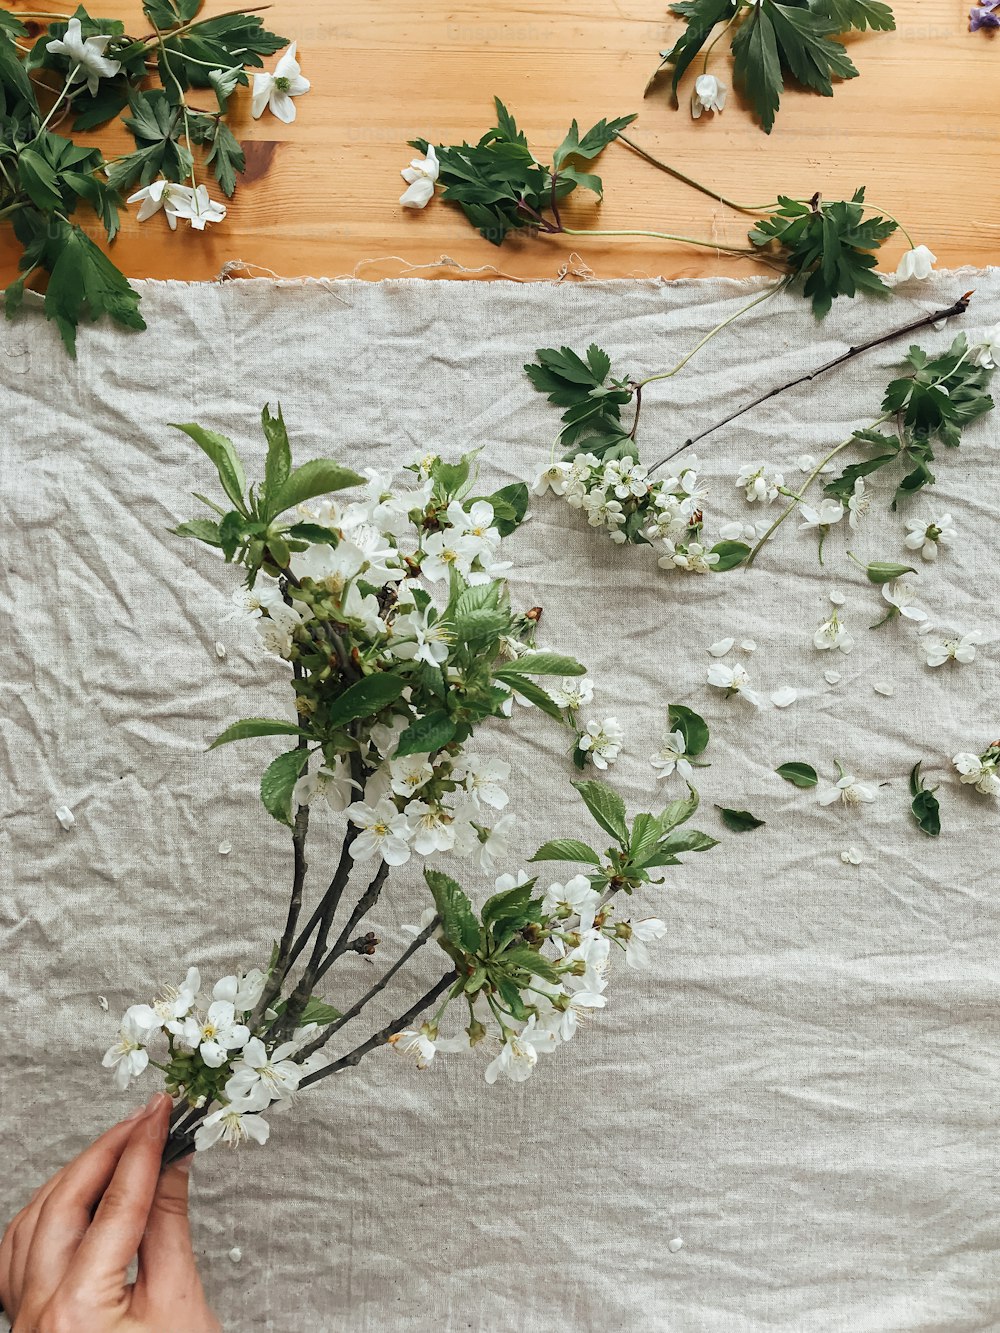 Hand holding cherry and apple branches, petals and leaves on rustic linen cloth,  top view. Hello spring and Happy Easter! Aesthetic simple image. Spring flowers on linen fabric